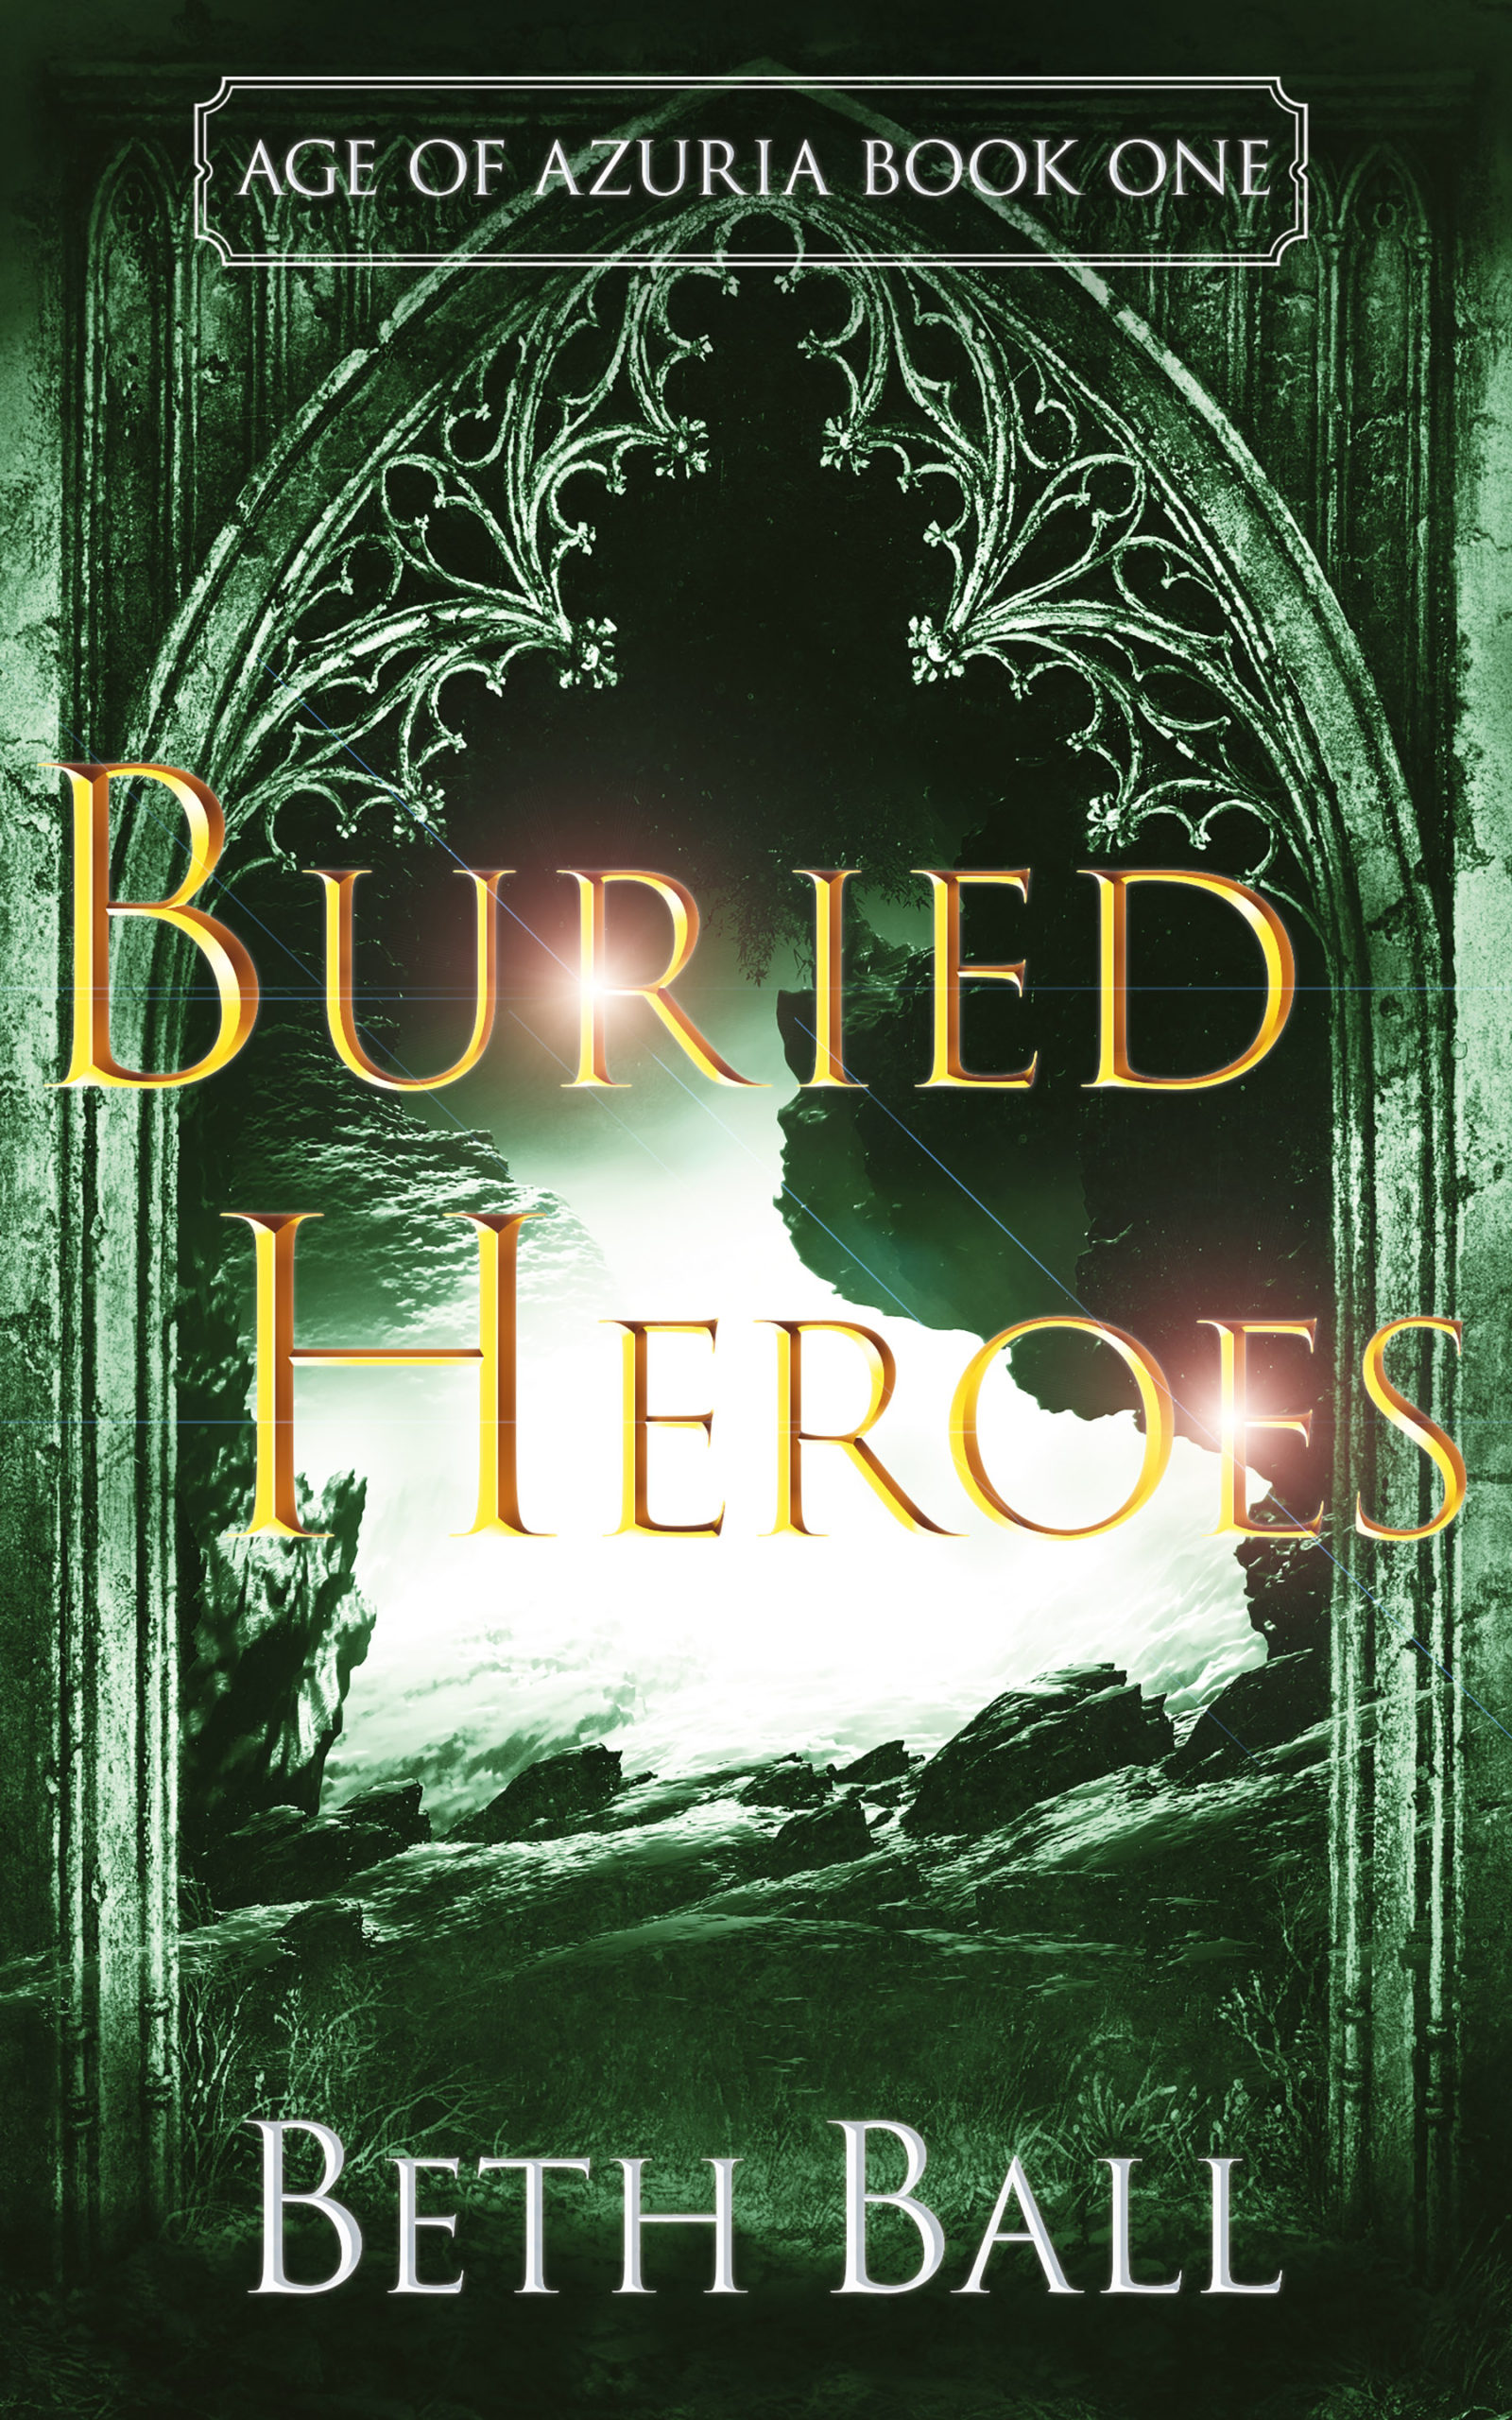 Buried Heroes: Age of Azuria Book One